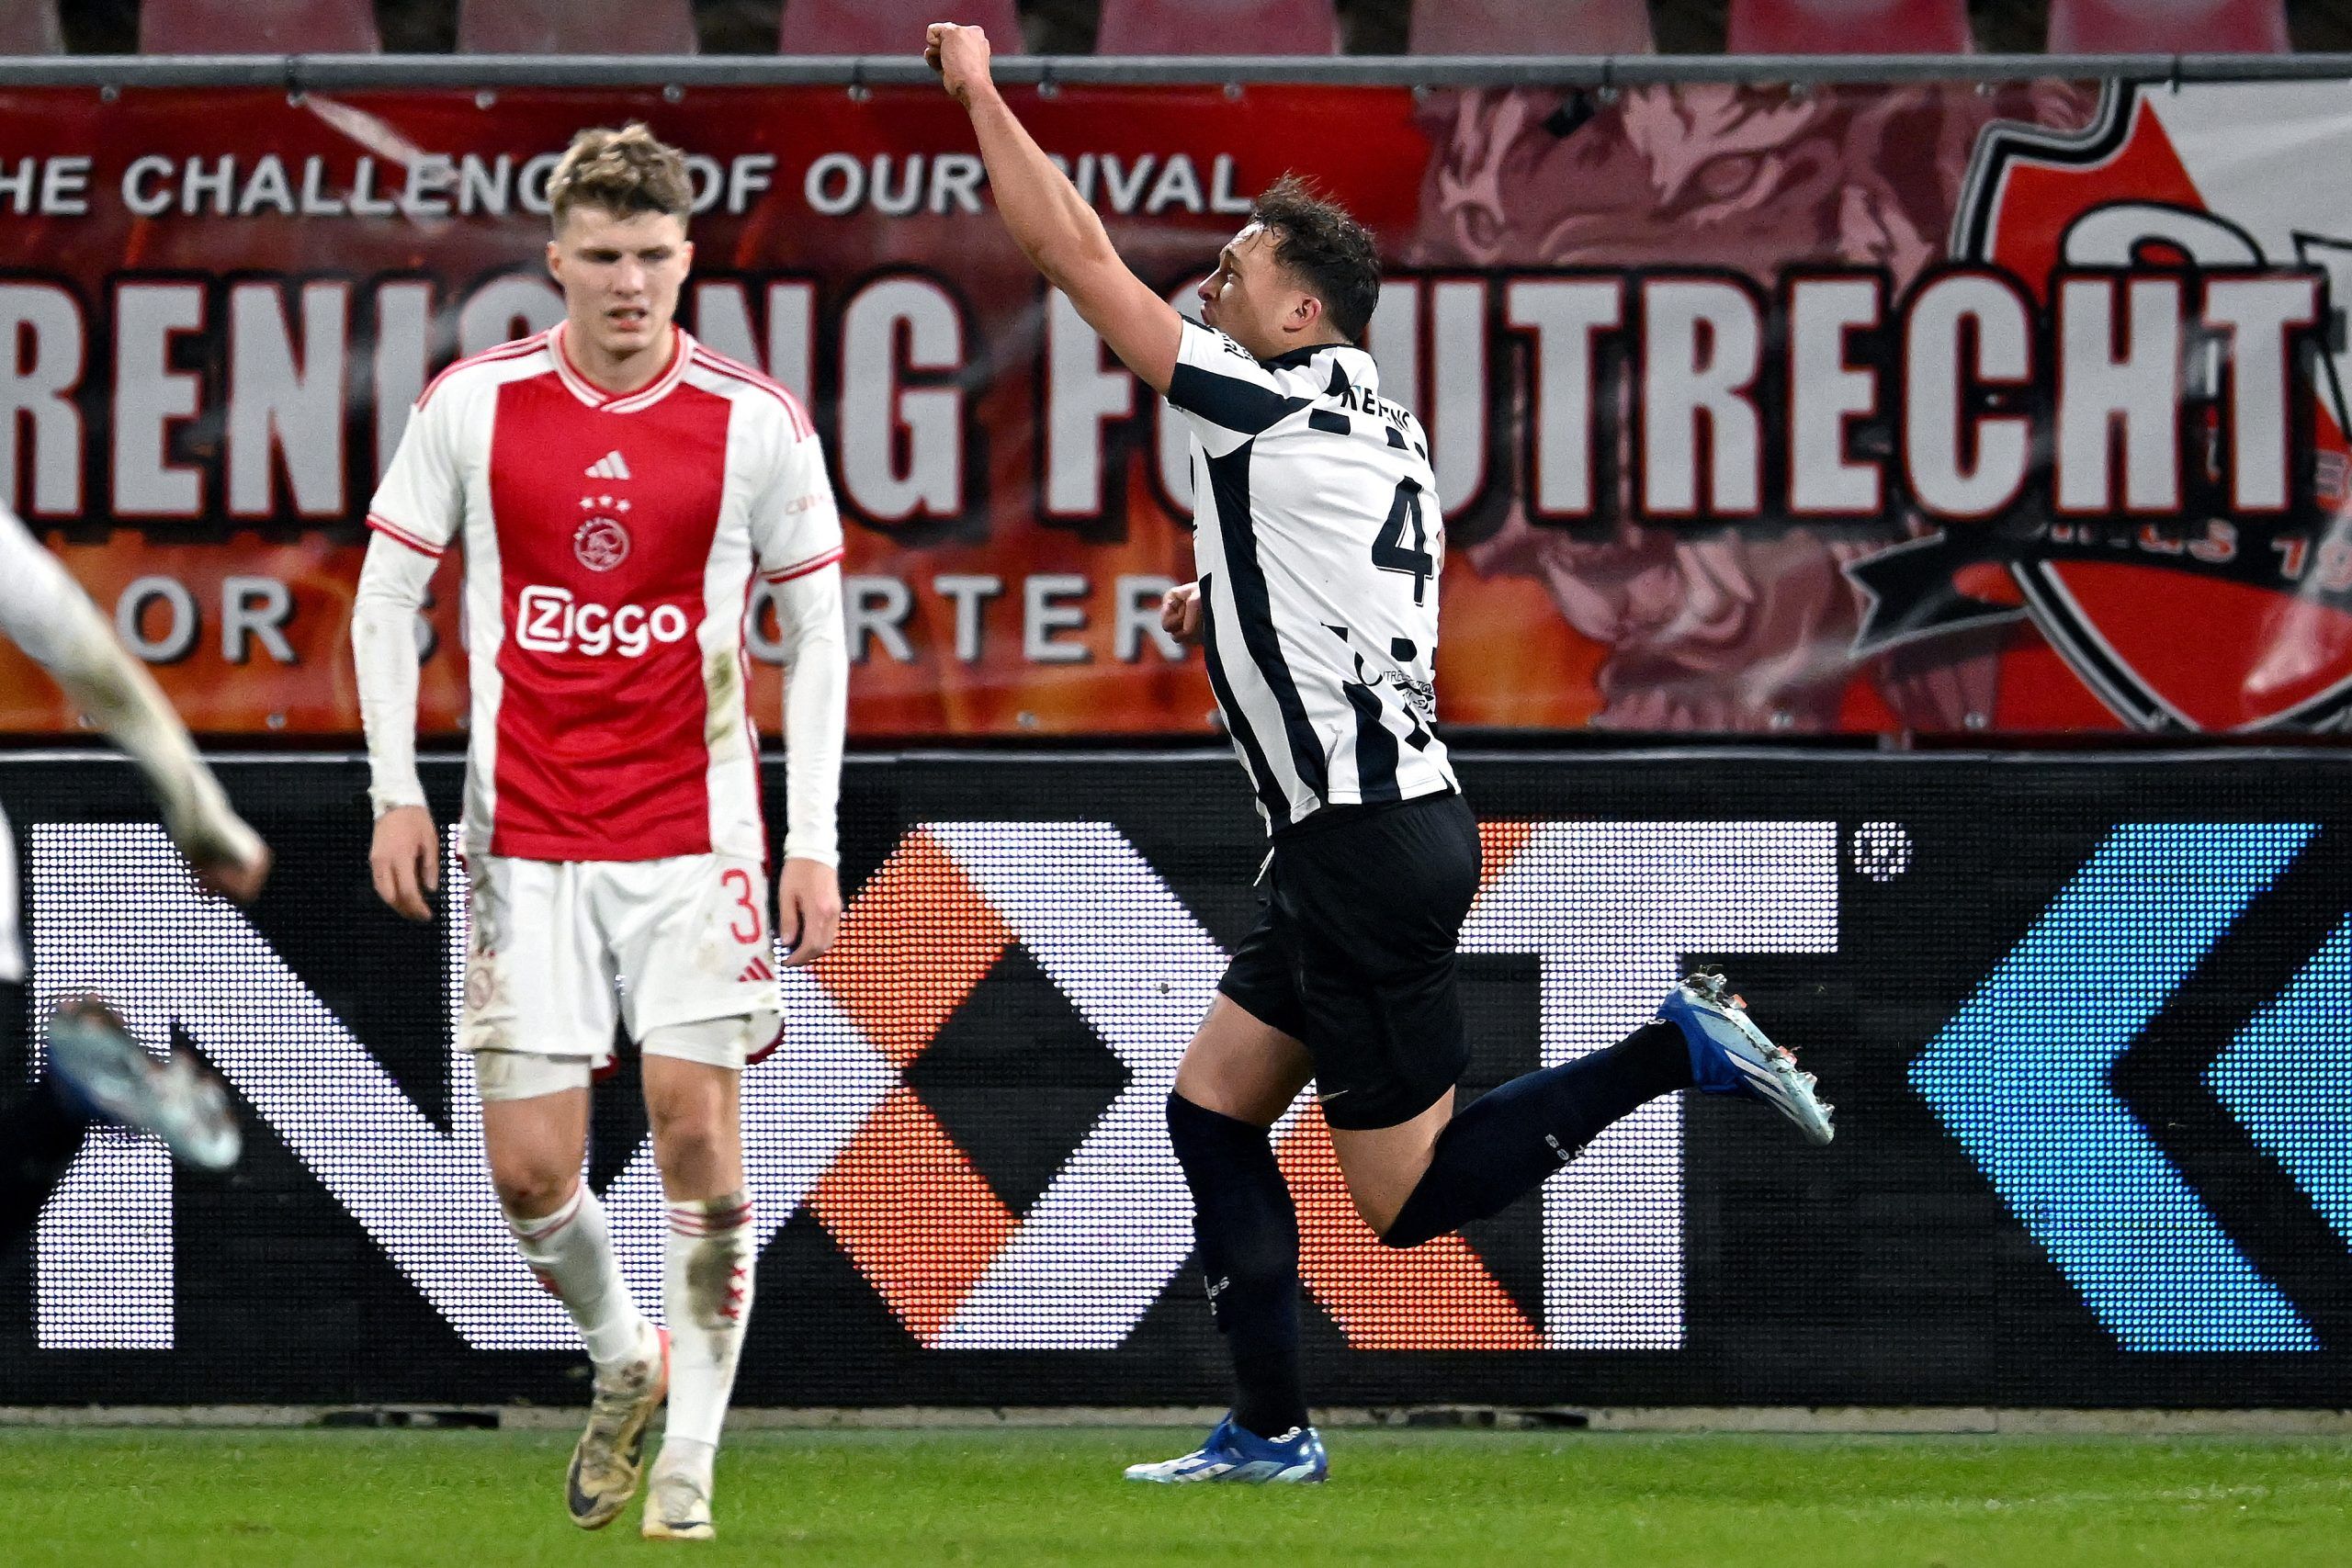 Ajax refund tickets and travel costs for all supporters in attendance during their humiliating